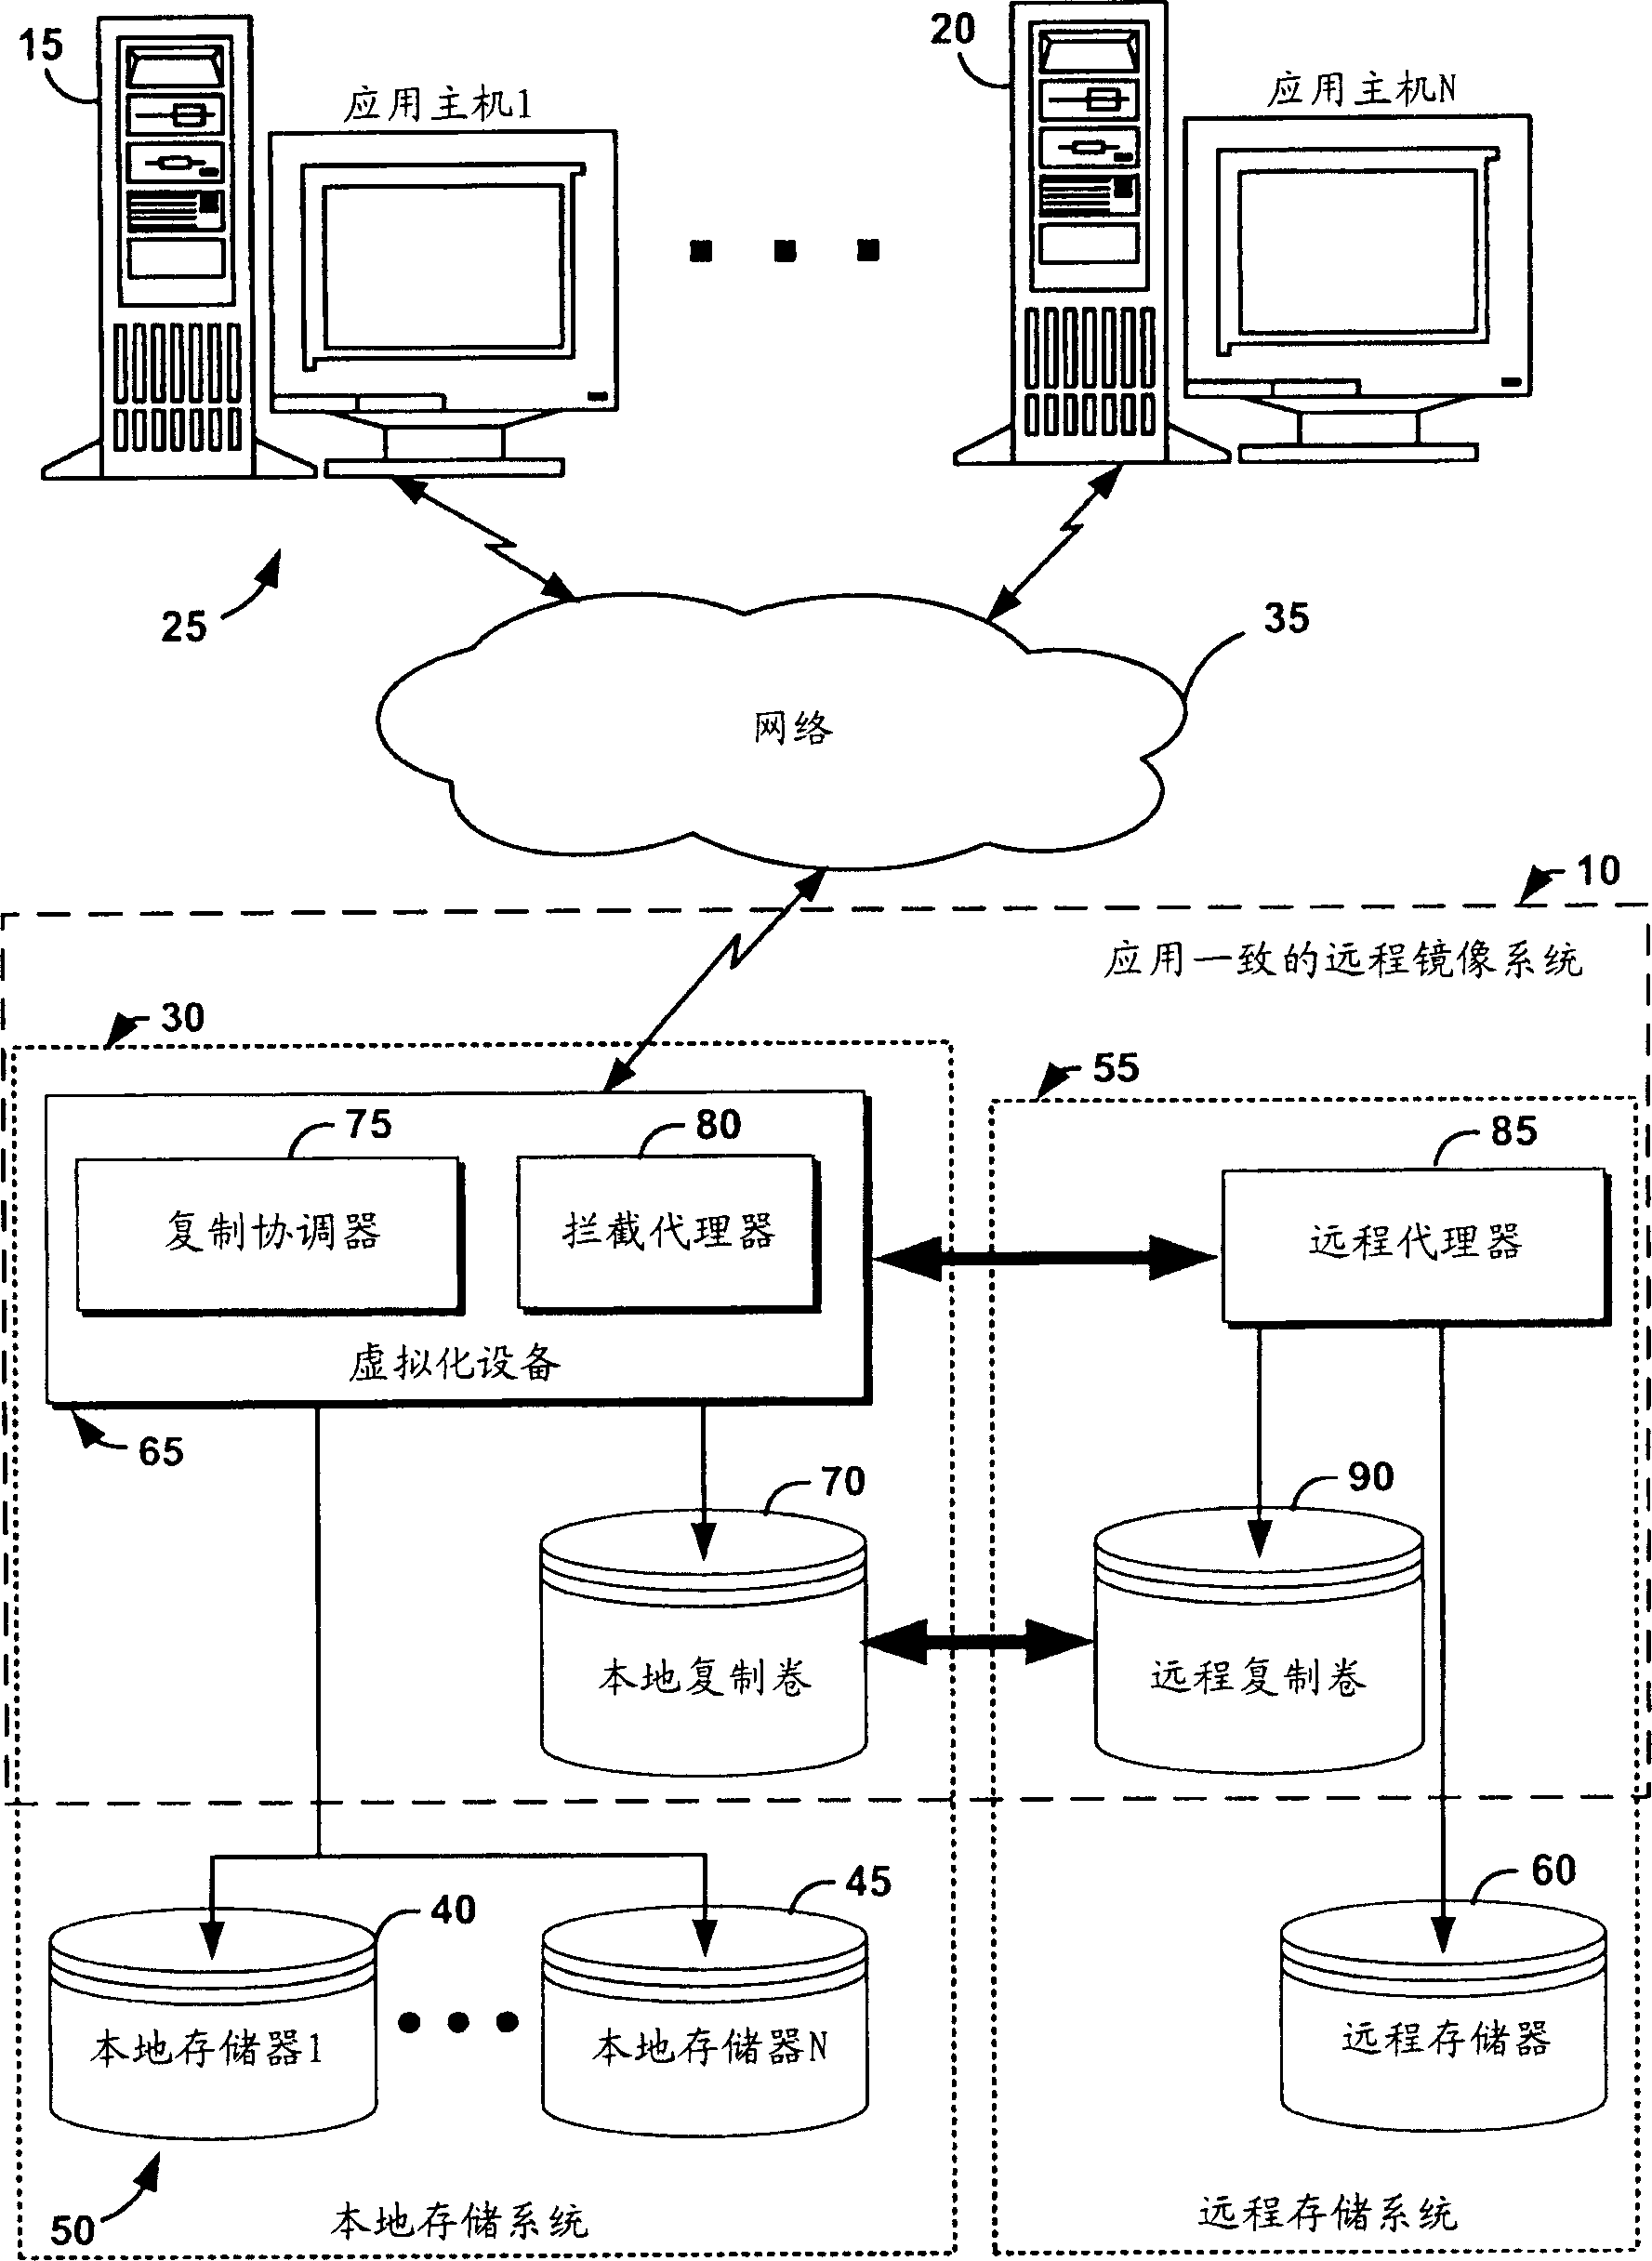 System and method for creating an application-consistent remote copy of data using remote mirroring